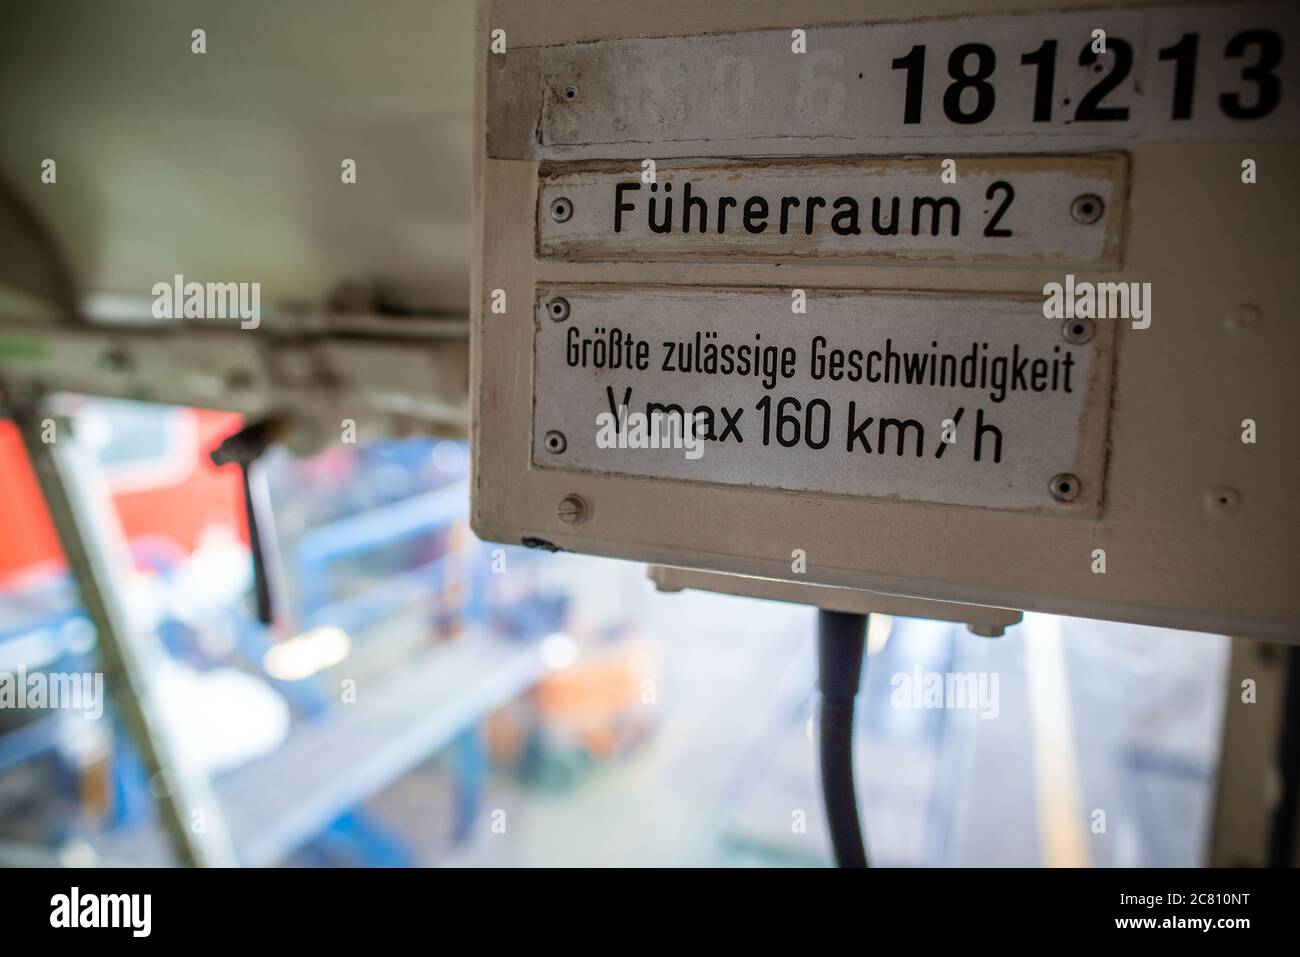 16 July 2020, Mecklenburg-Western Pomerania, Mukran: On the driver's cab of the class 181 electric locomotive built in 1972 in the repair workshop of Baltic Port Services GmbH (BPS) you can see the sign for maximum speed. Several of the locomotives built from a small series at Krupp in Essen and AEG in Berlin - today, eight of the once 29 of these electric locomotives still exist - are being repaired for the company Schlünß Eisenbahn Logistik (SEL) near Neumünster in Schleswig-Holstein. In the workshop opened by the Deutsche Reichsbahn in 1986, rail vehicles coming from the railway ferry were Stock Photo